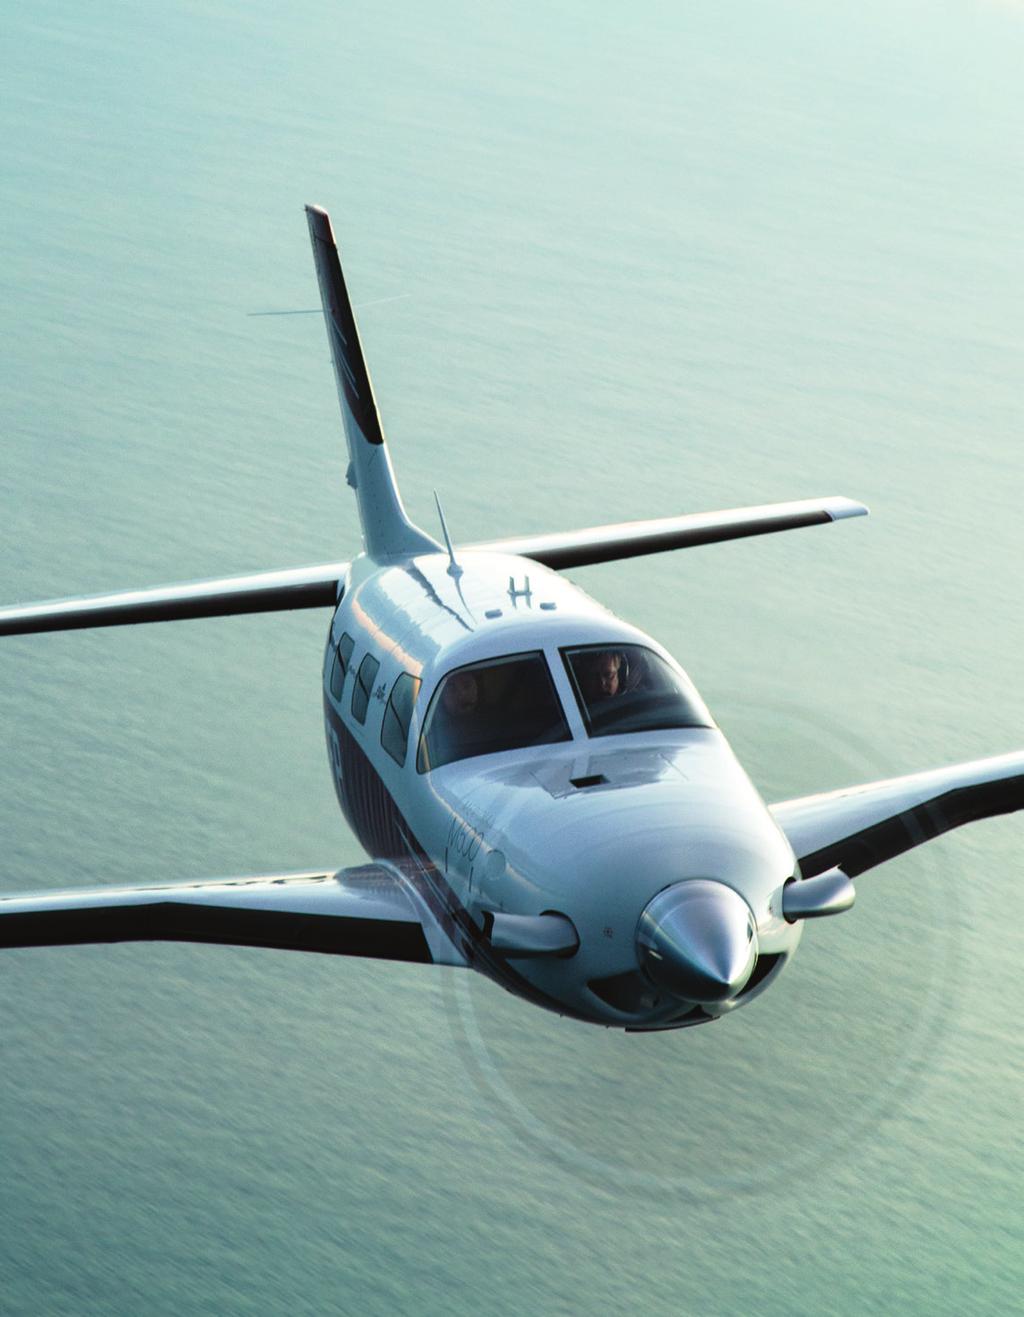 Piper Aircraft, Inc. reserves the right to make changes, including, but not limited to, changes in specifications, materials, equipment, and/or prices at any time without prior notice.